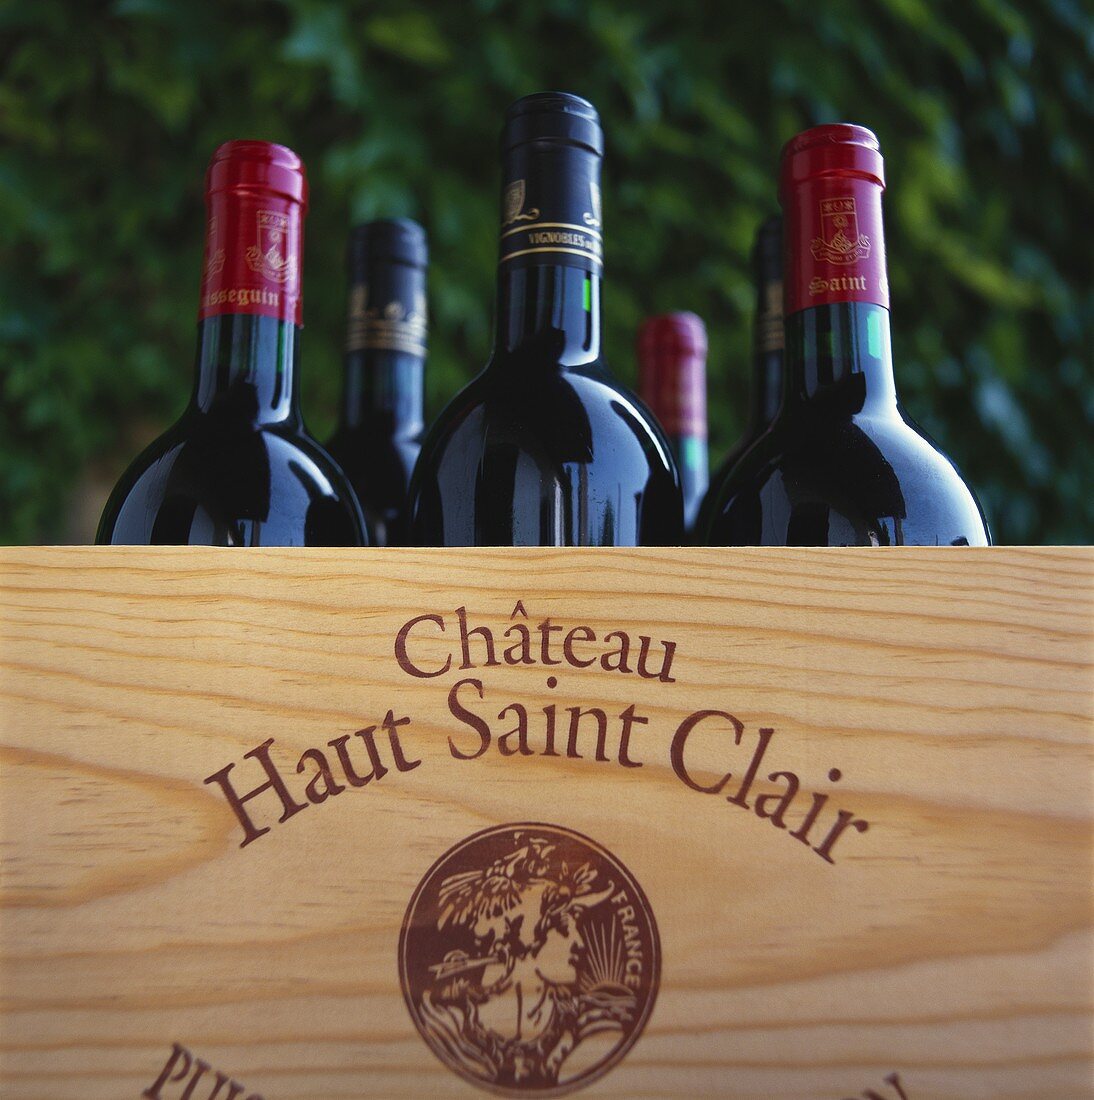 Wine bottles from Chateau Haut Saint Clair, France